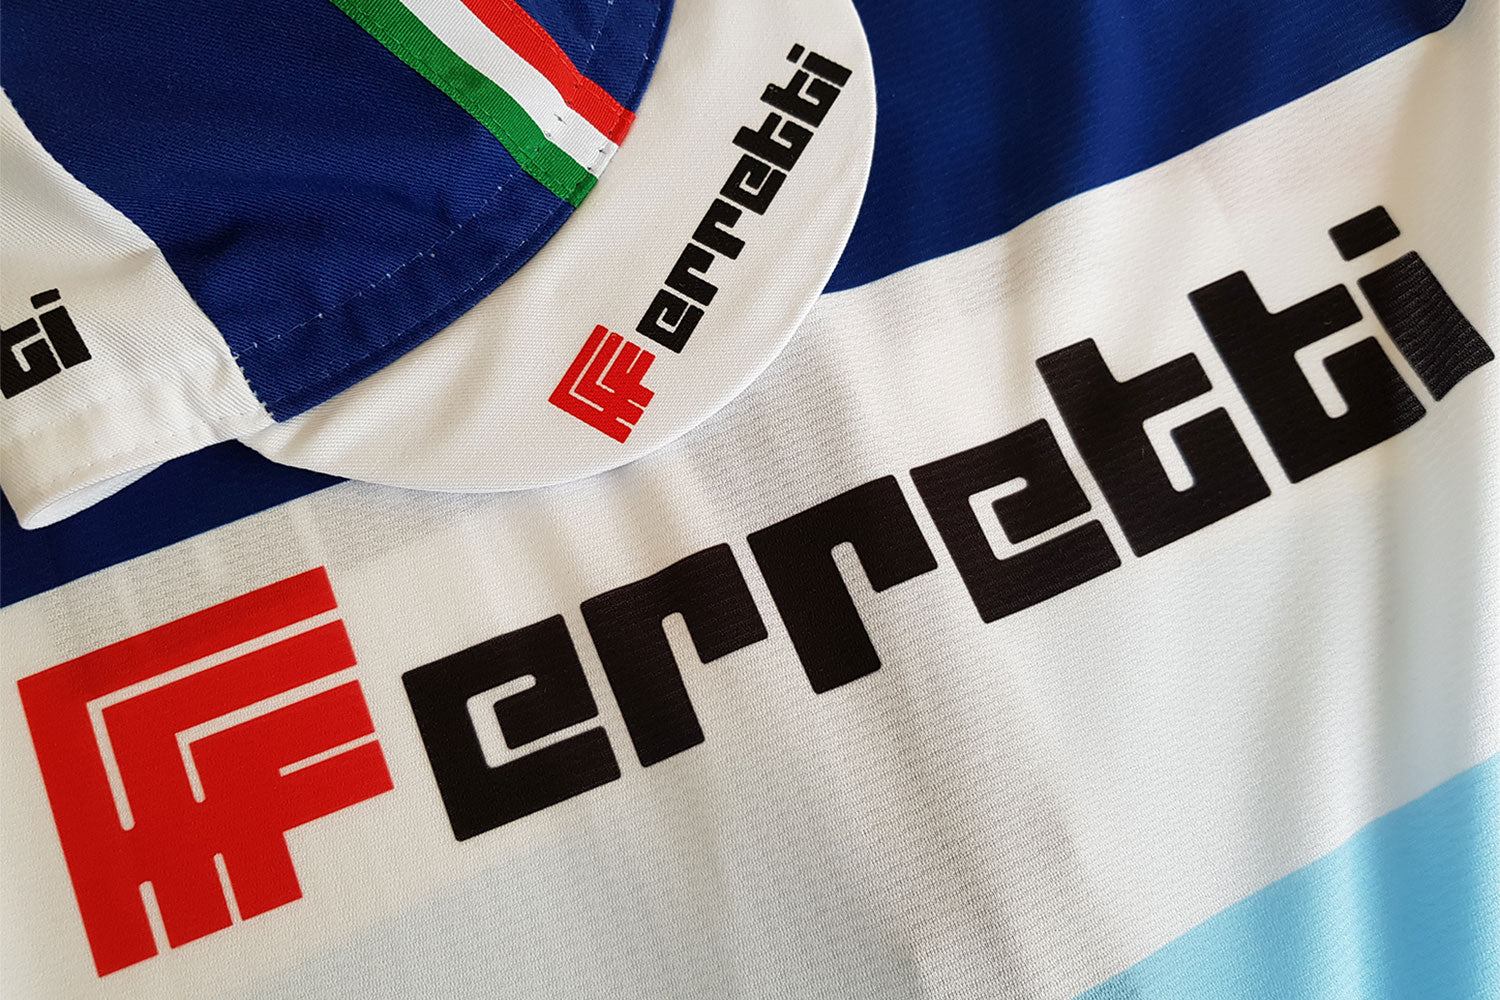 The Ferretti retro cycling team jersey will be available to buy in June 2019.